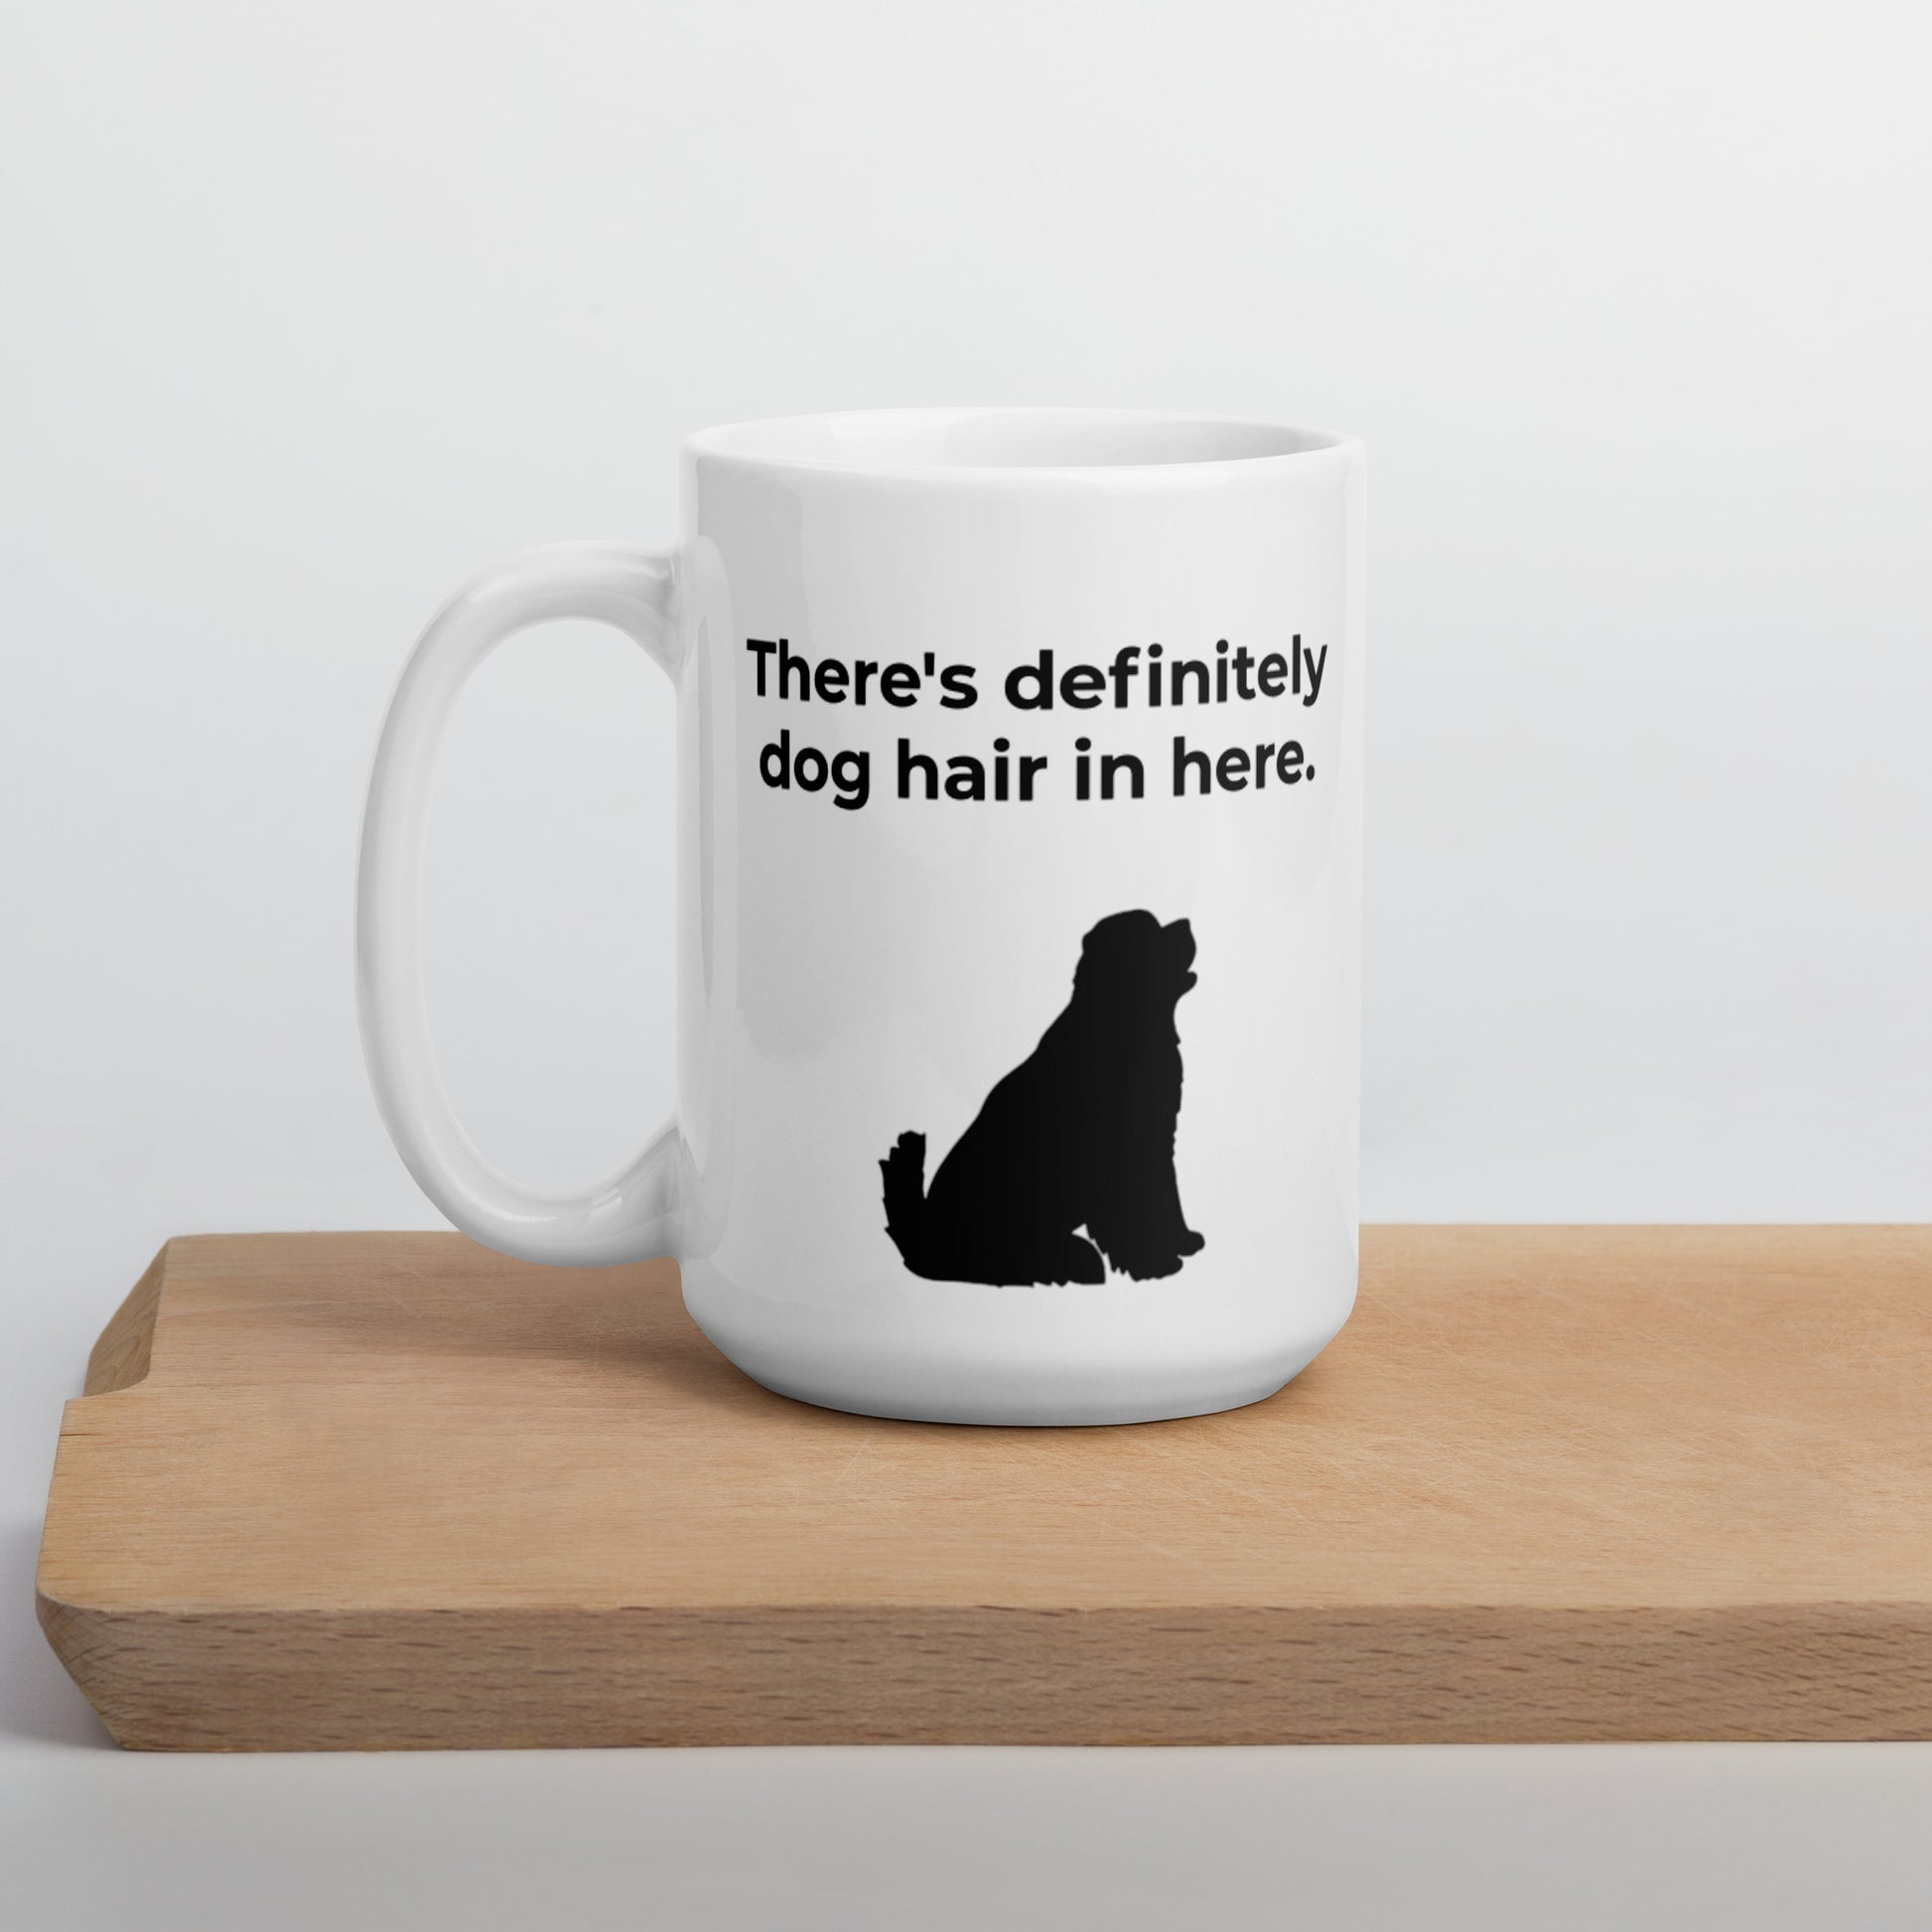 White 15 oz coffee mug with a "There's definitely dog hair in here" slogan and the silhouette of a big Newfoundland dog looking up